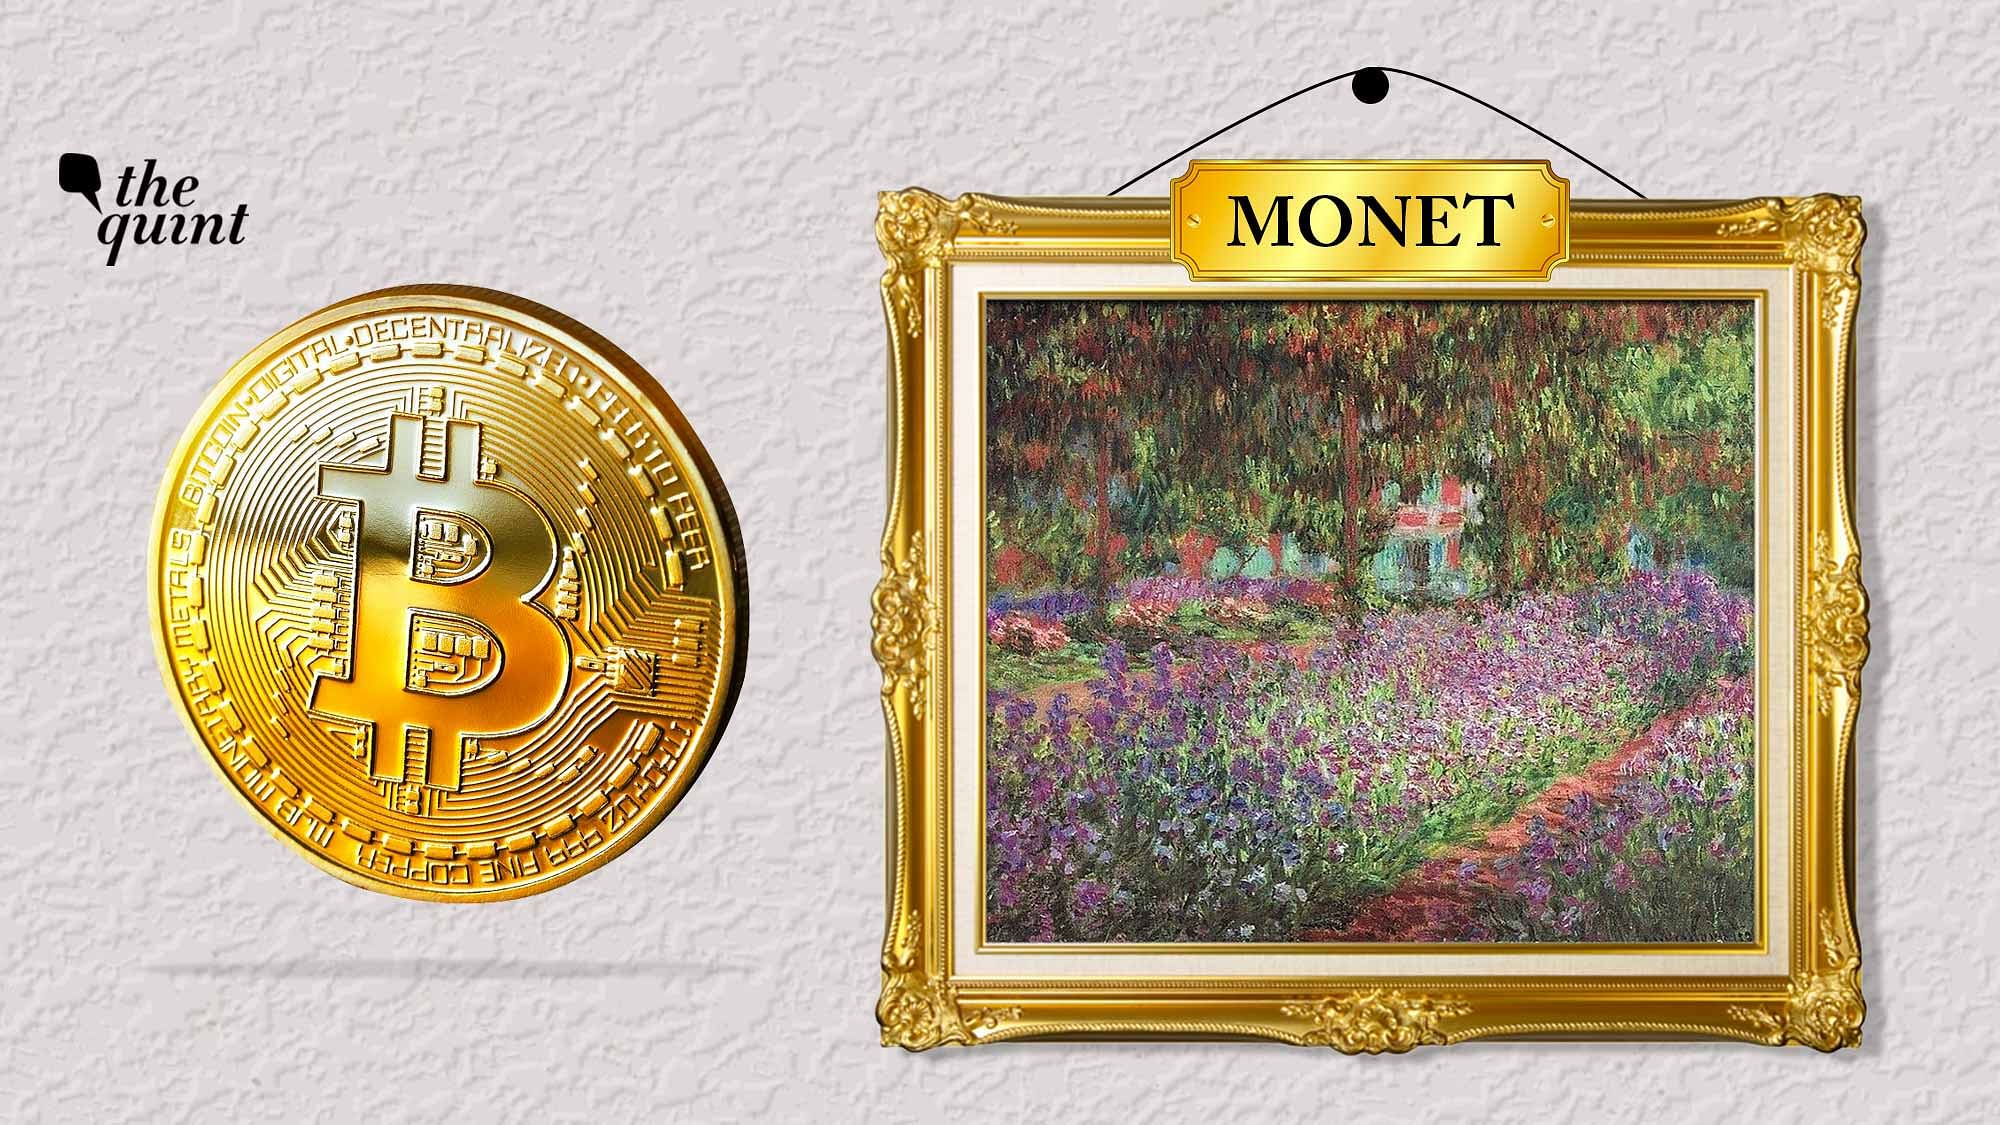 Image of ‘The Artist’s Garden at Giverny’ (R) is an oil-on-canvas painting by Claude Monet made in 1900, now at the Musée d’Orsay, Paris — and image of a bitcoin (L), used for representational purposes.